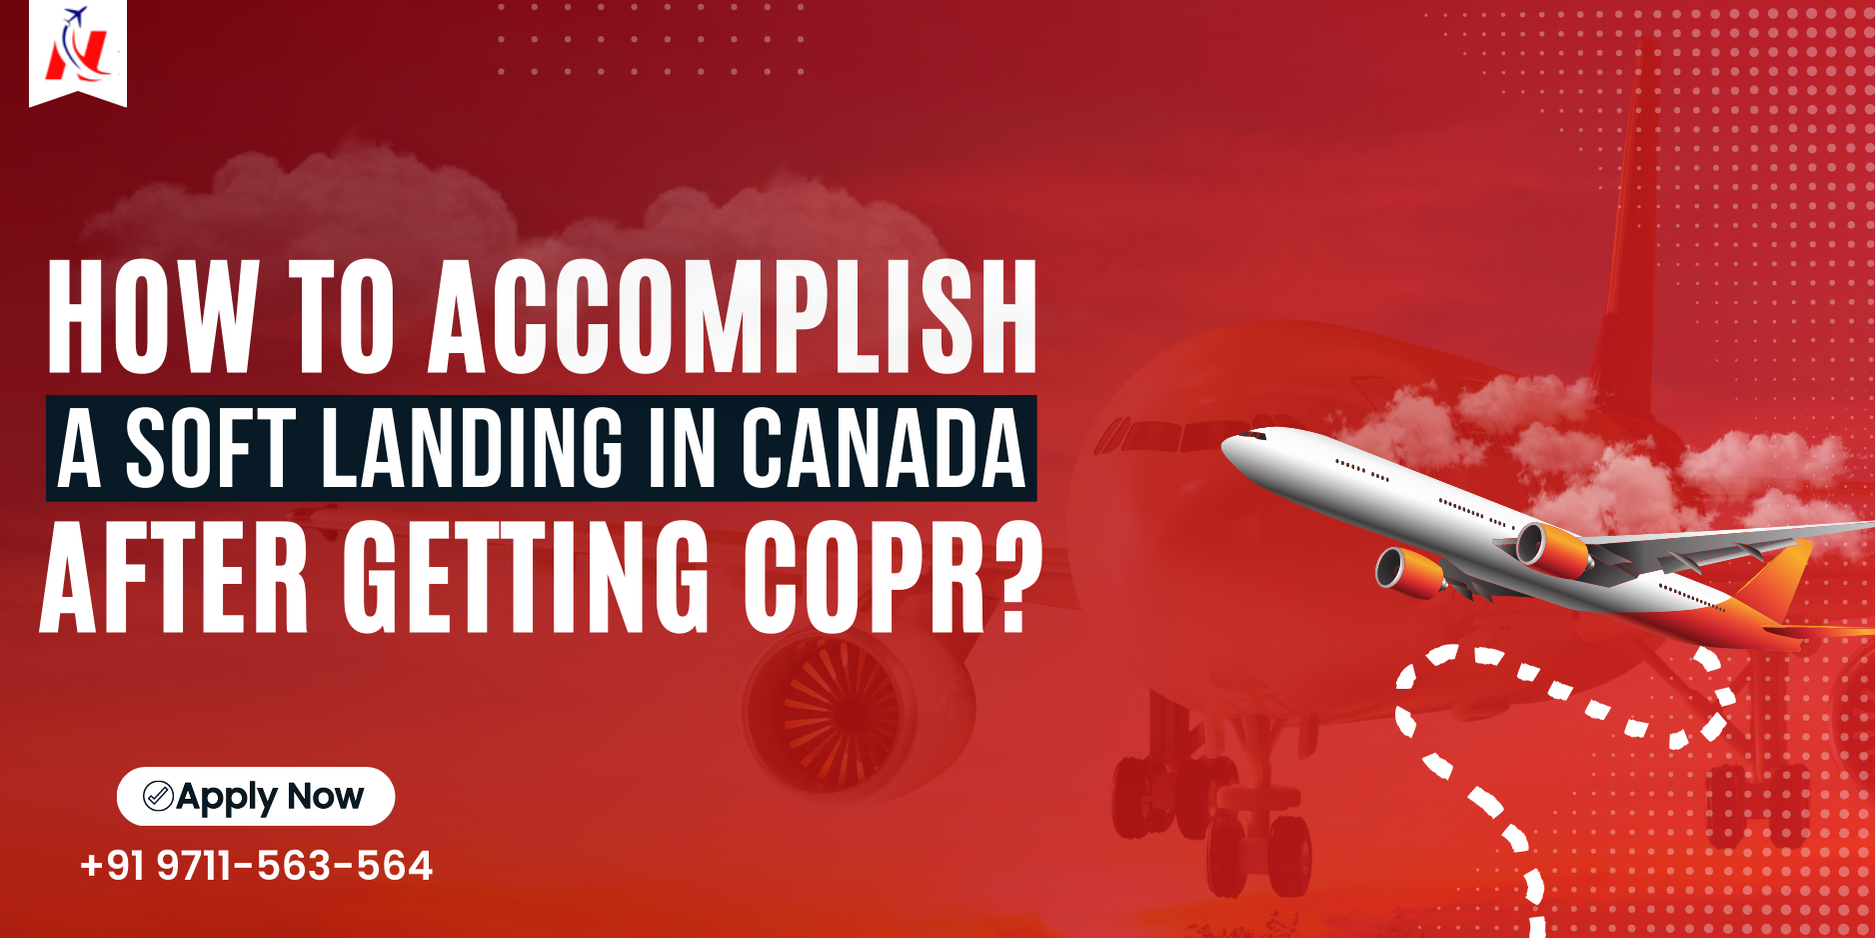 How to accomplish a soft landing in Canada after getting COPR?